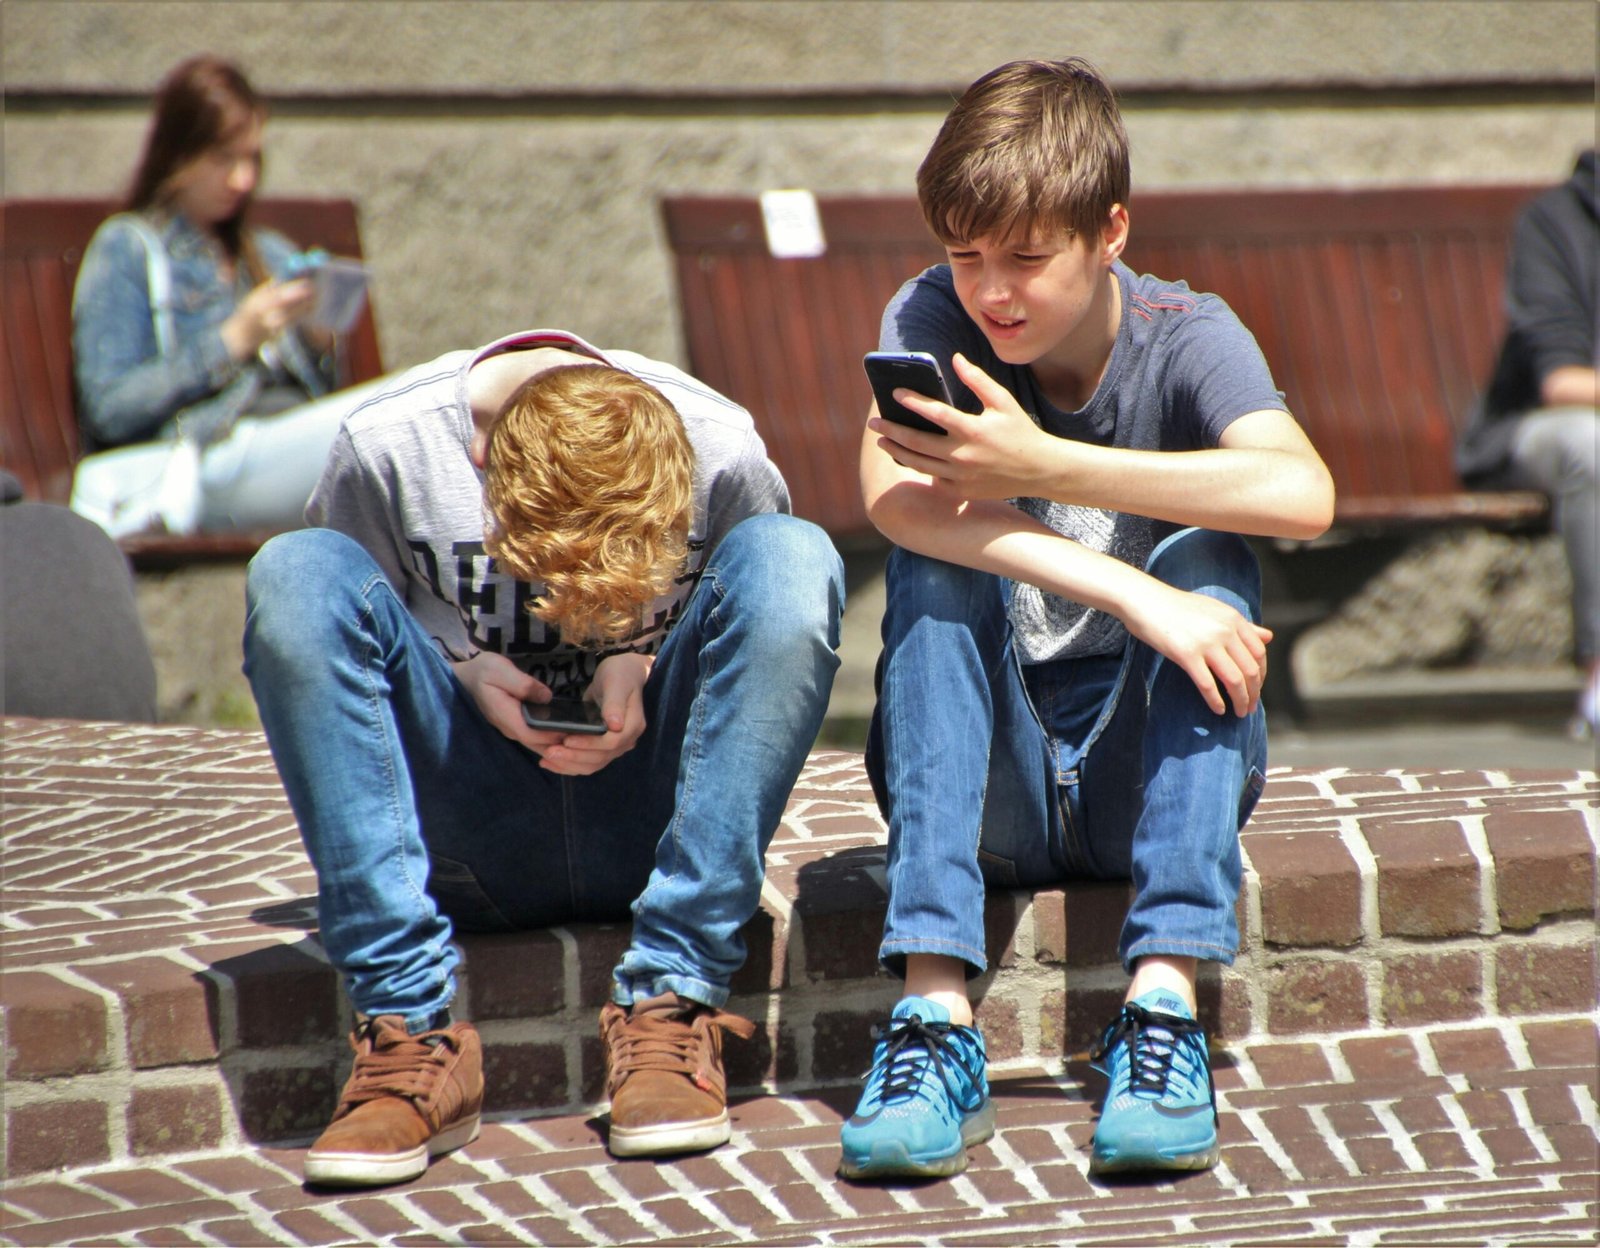 This Country Is Planning A Complete Ban On Mobile Phones In Schools